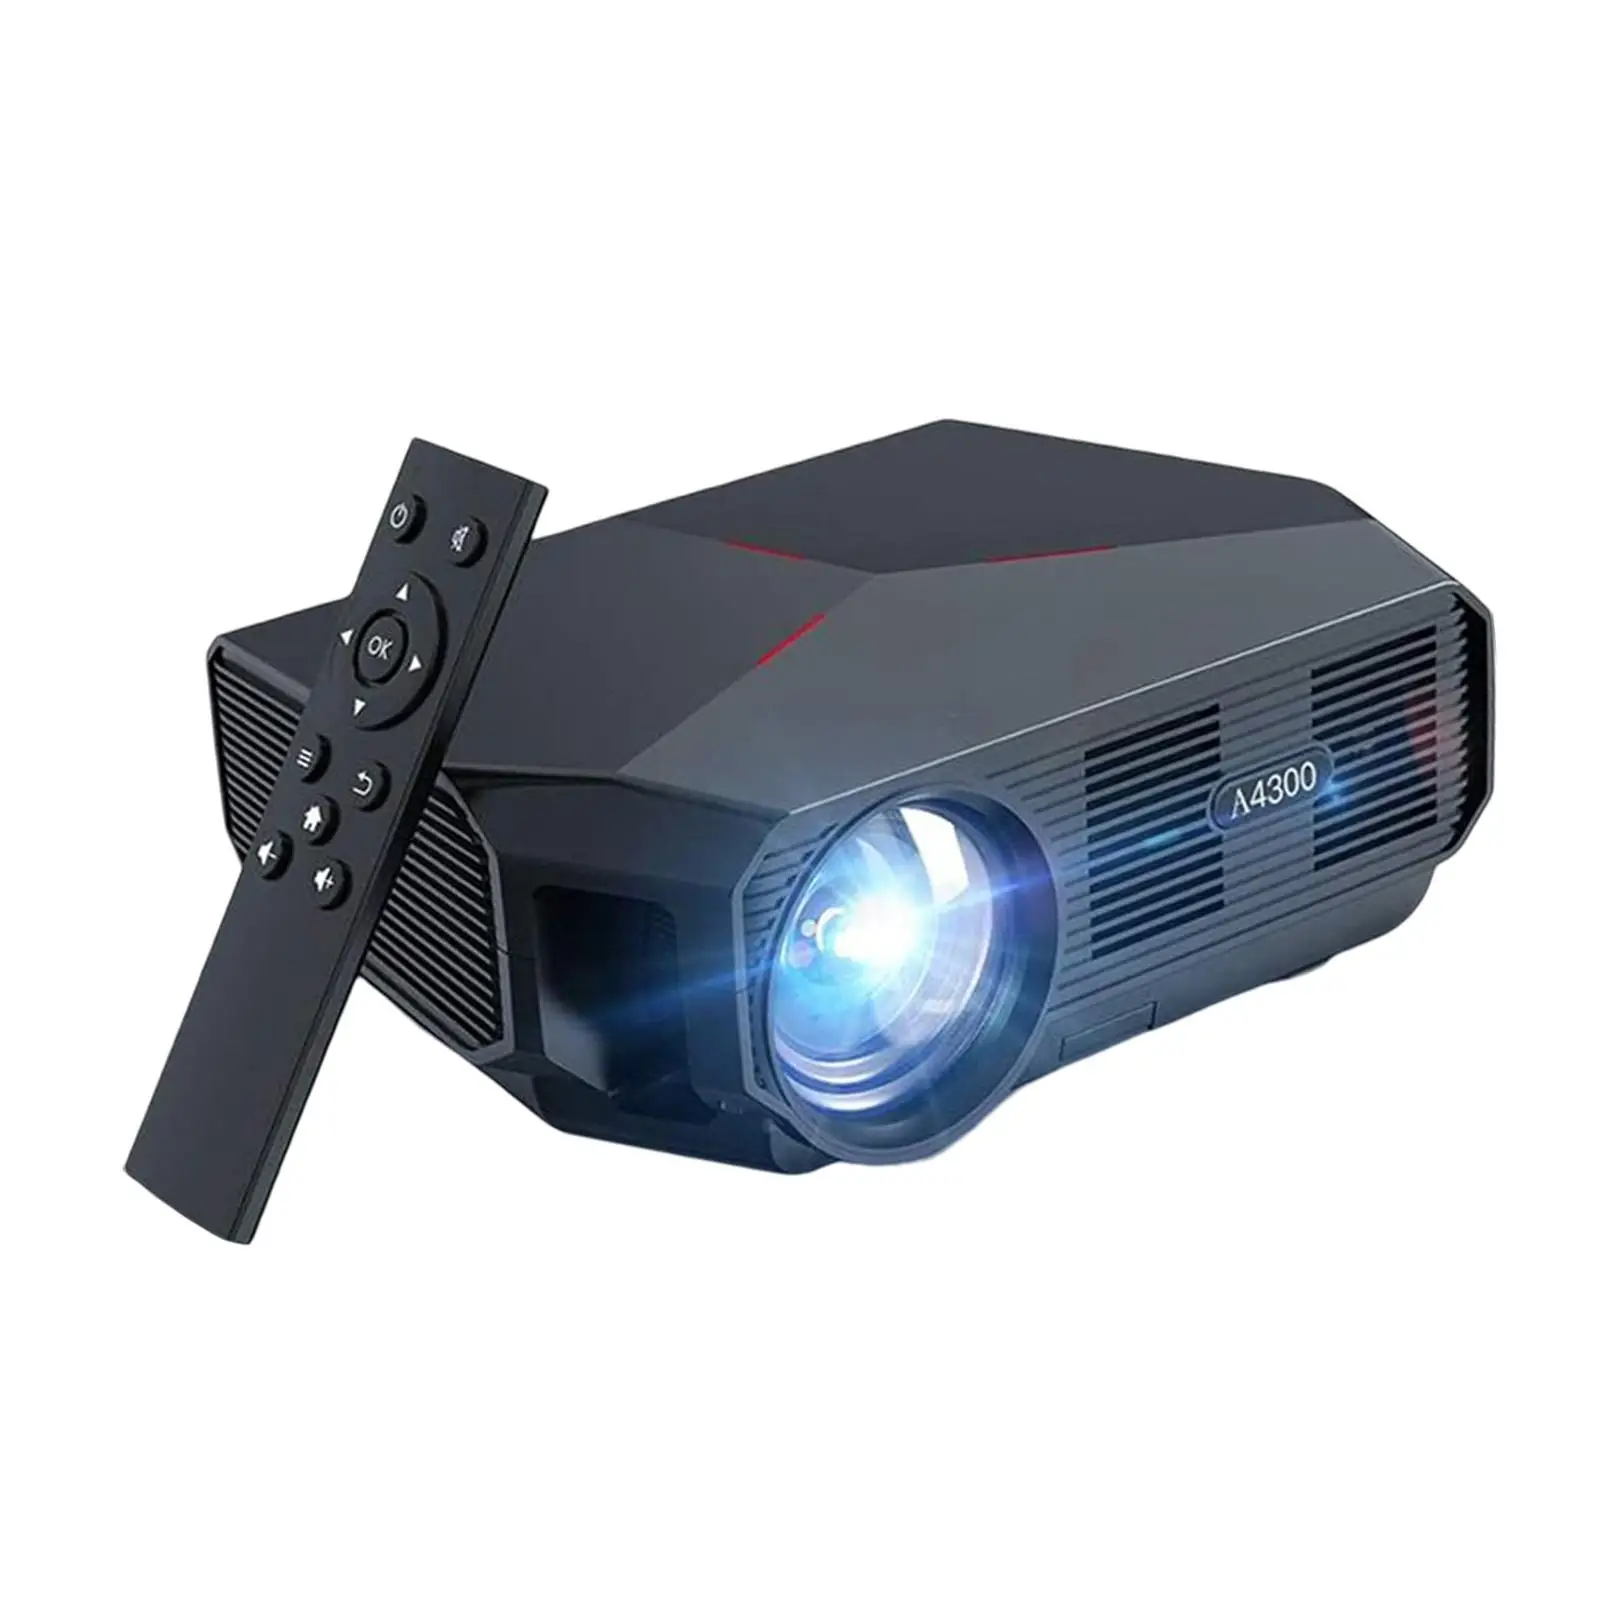 Outdoor Movie Projector 300 ANSI 4600 Lumens LED Home Theater Projectors for Meeting Work Study Entertainment Kids Adults Gift